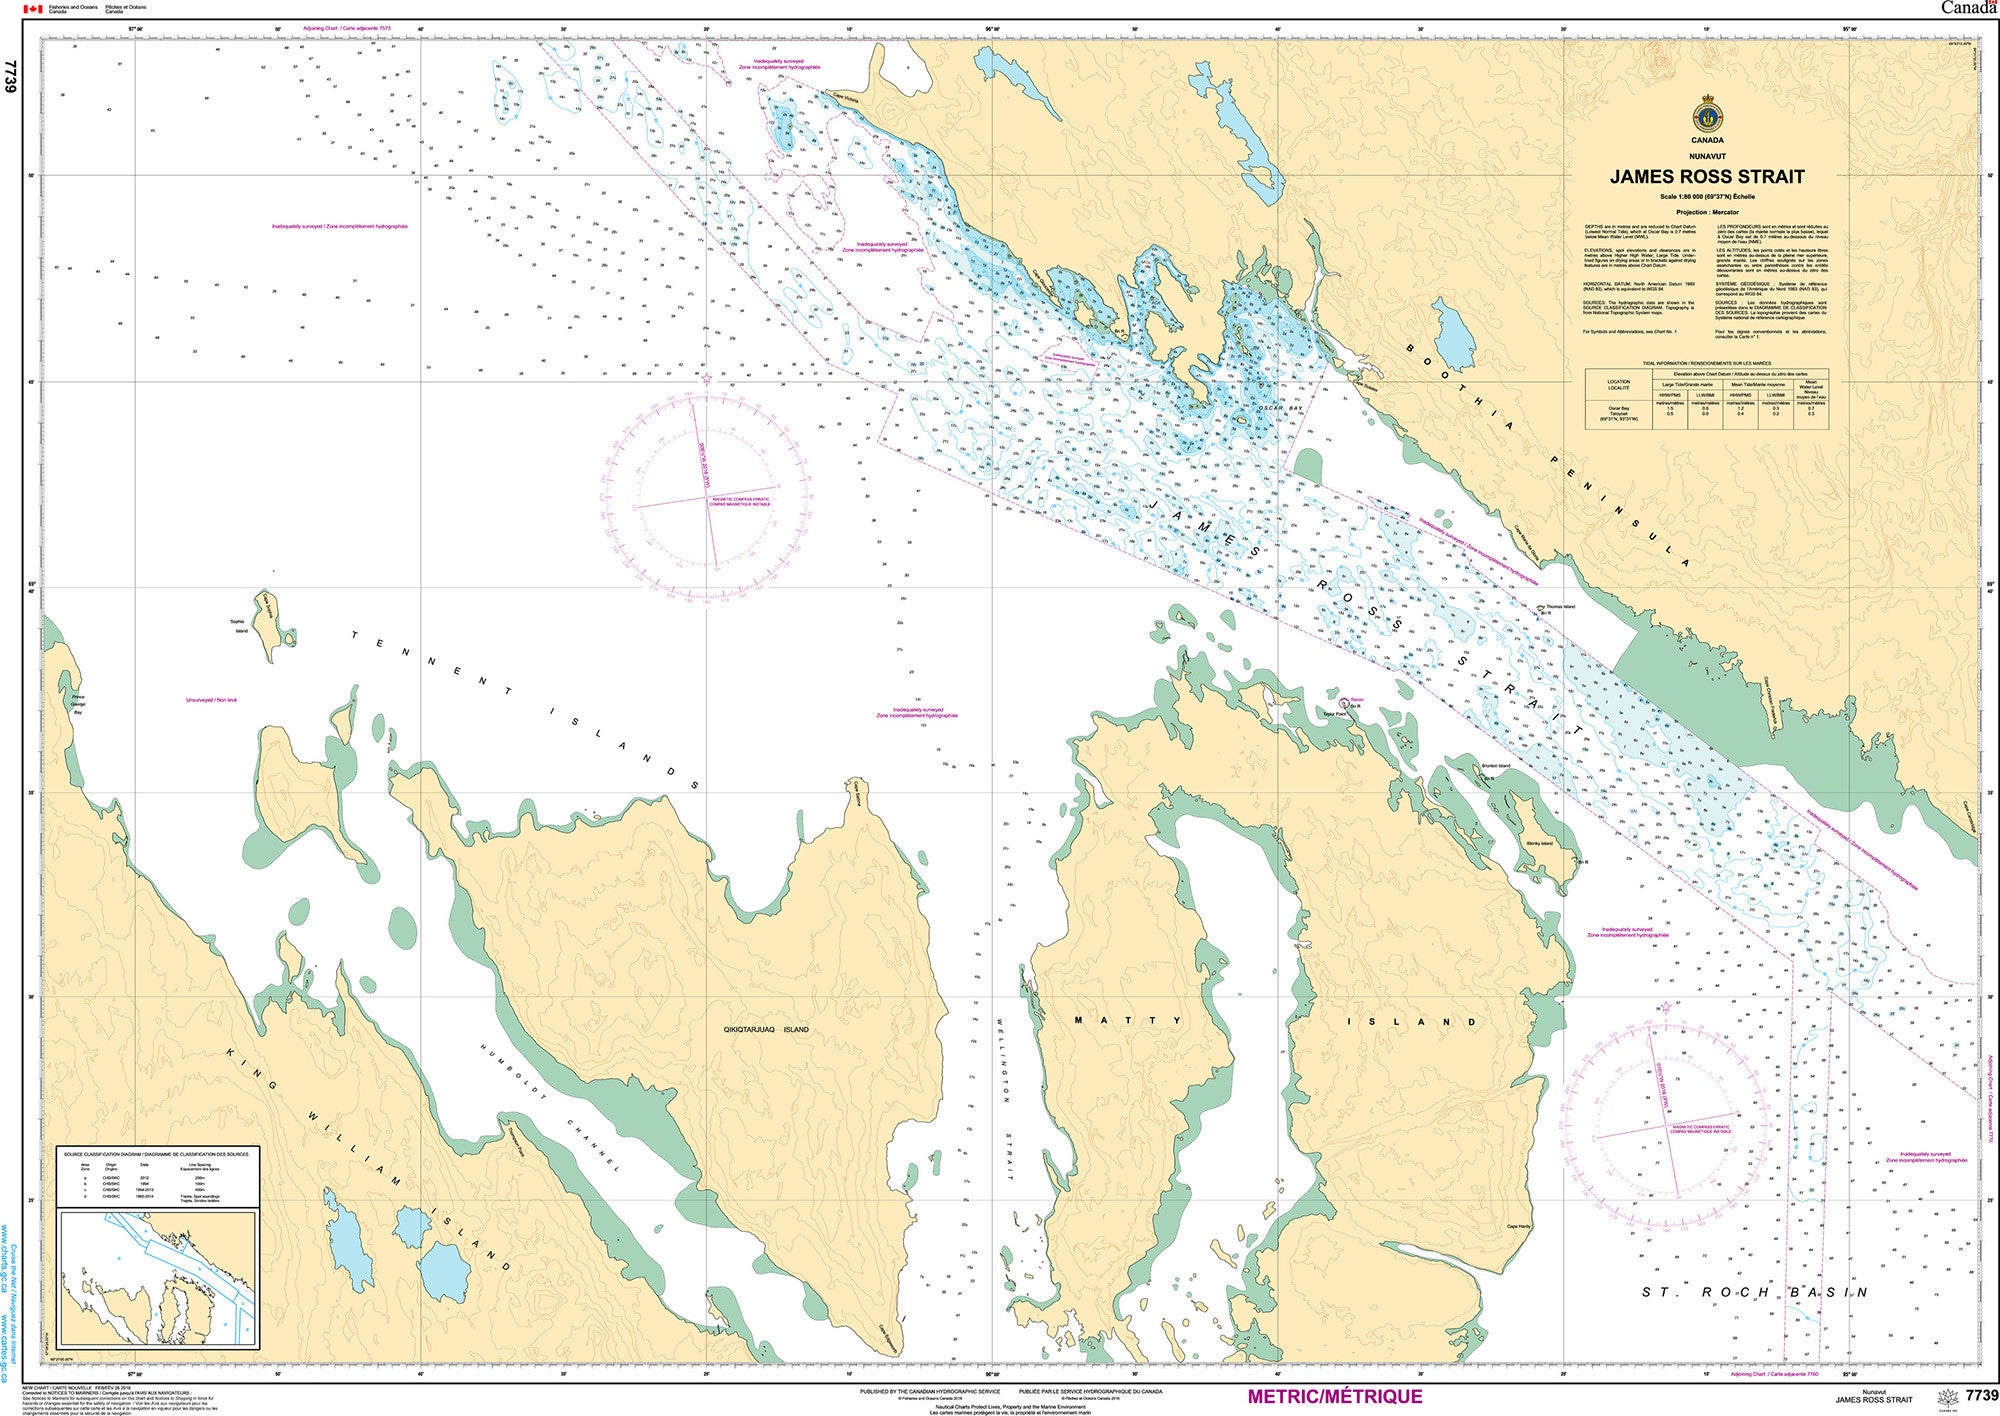 Canadian Hydrographic Service Nautical Chart CHS7739: James Ross Strait